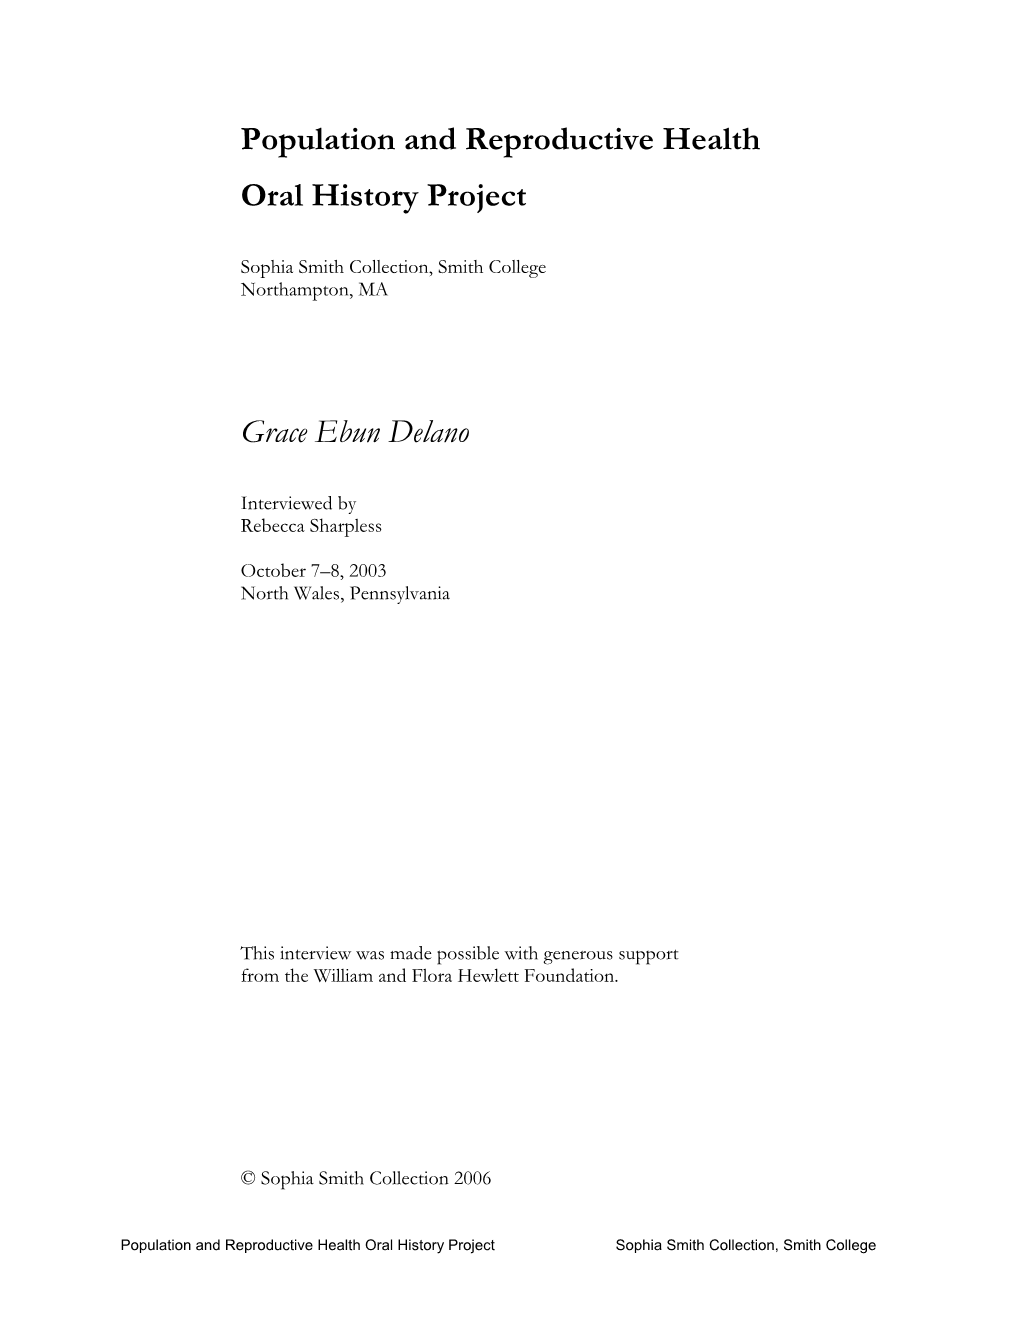 Population and Reproductive Health Oral History Project: Grace Ebun